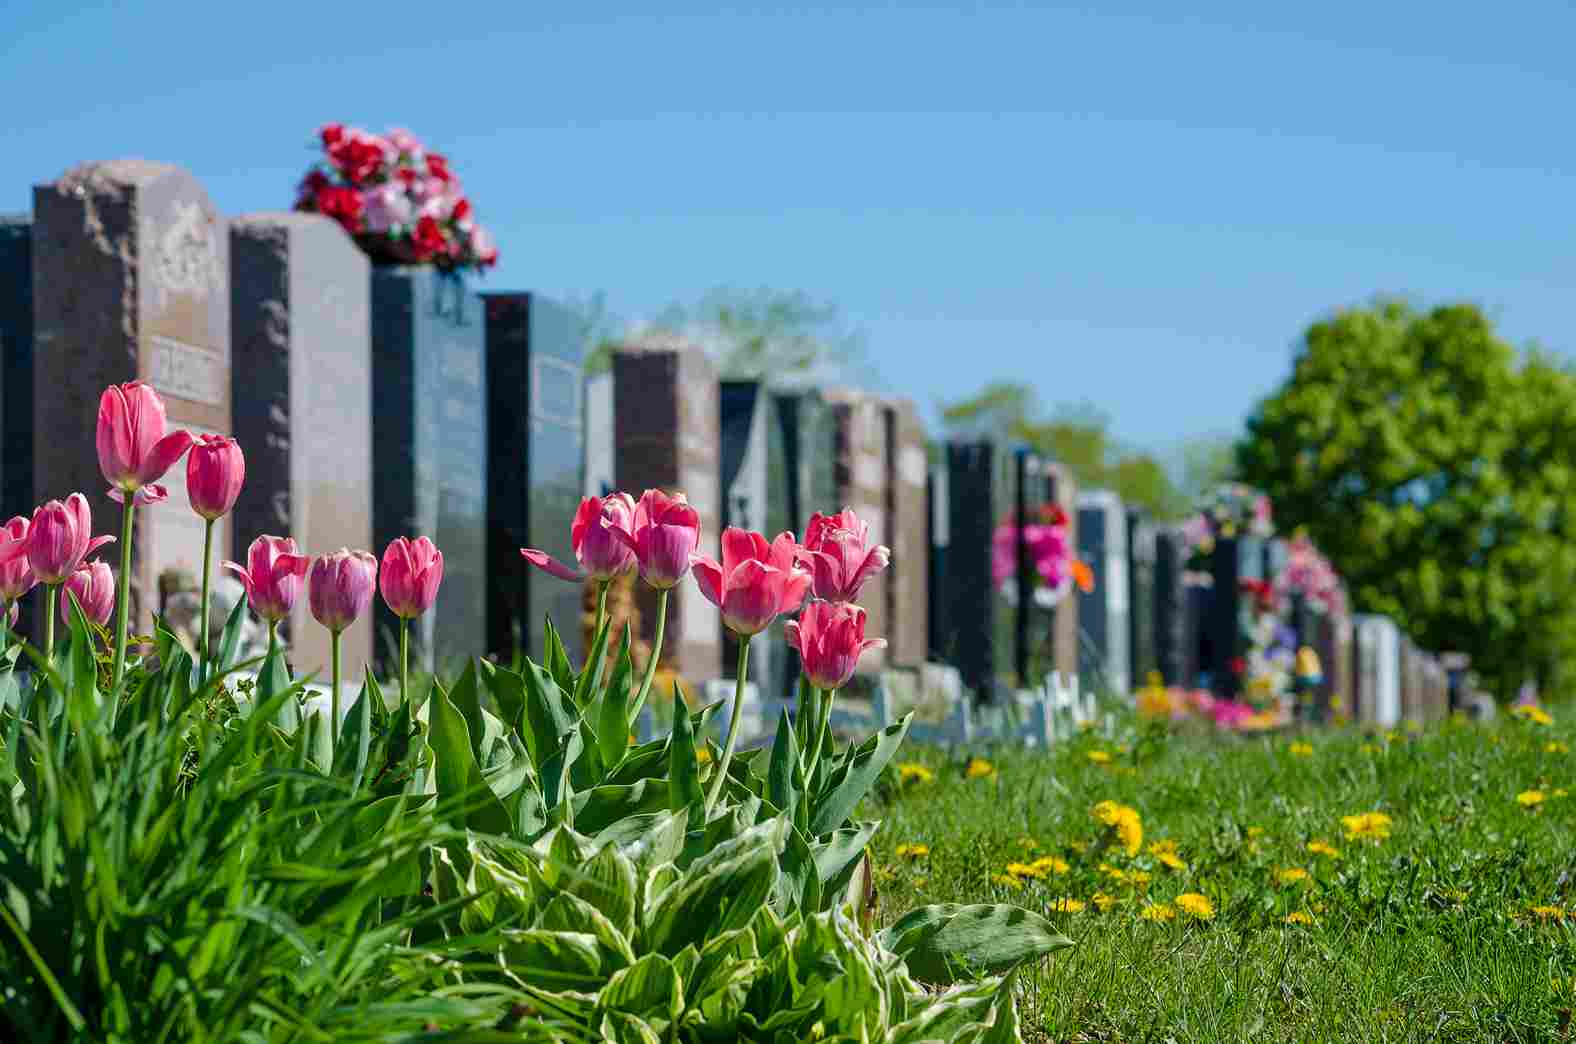 /images/lawLibrary/Articles/how-to-buy-a-cemetery-plot